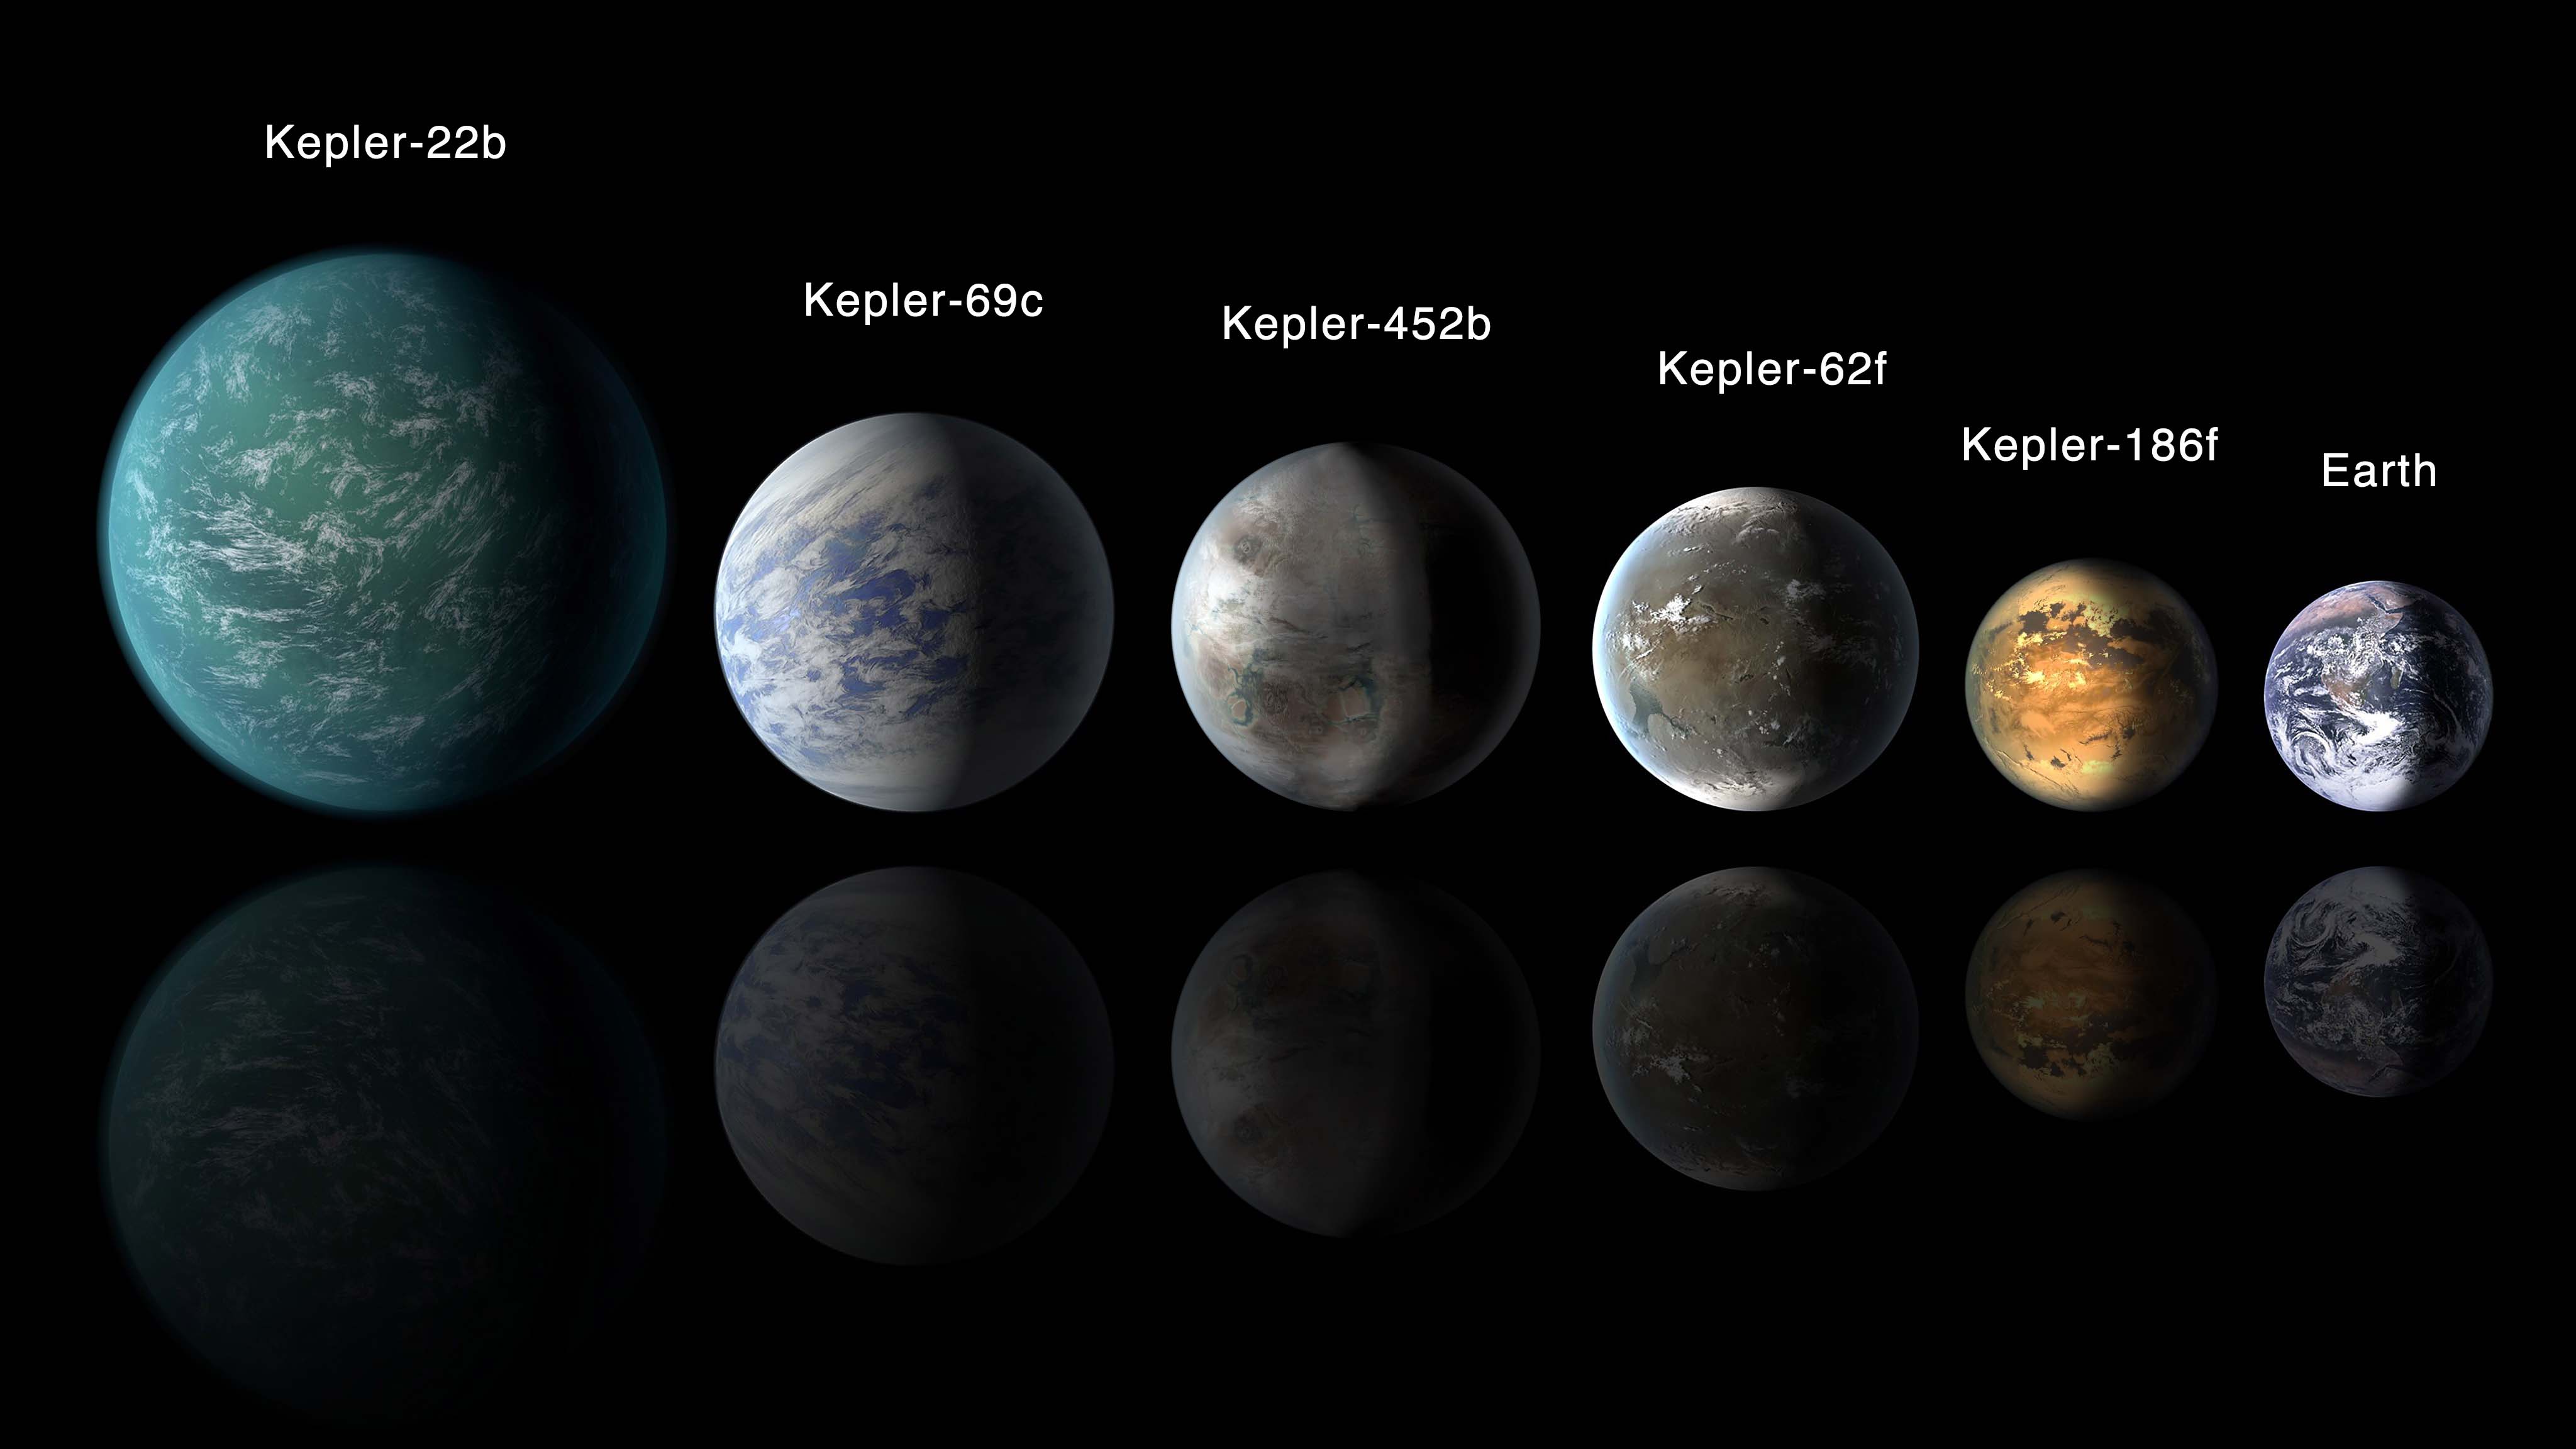 Finding Another Earth: Candidate Lineup